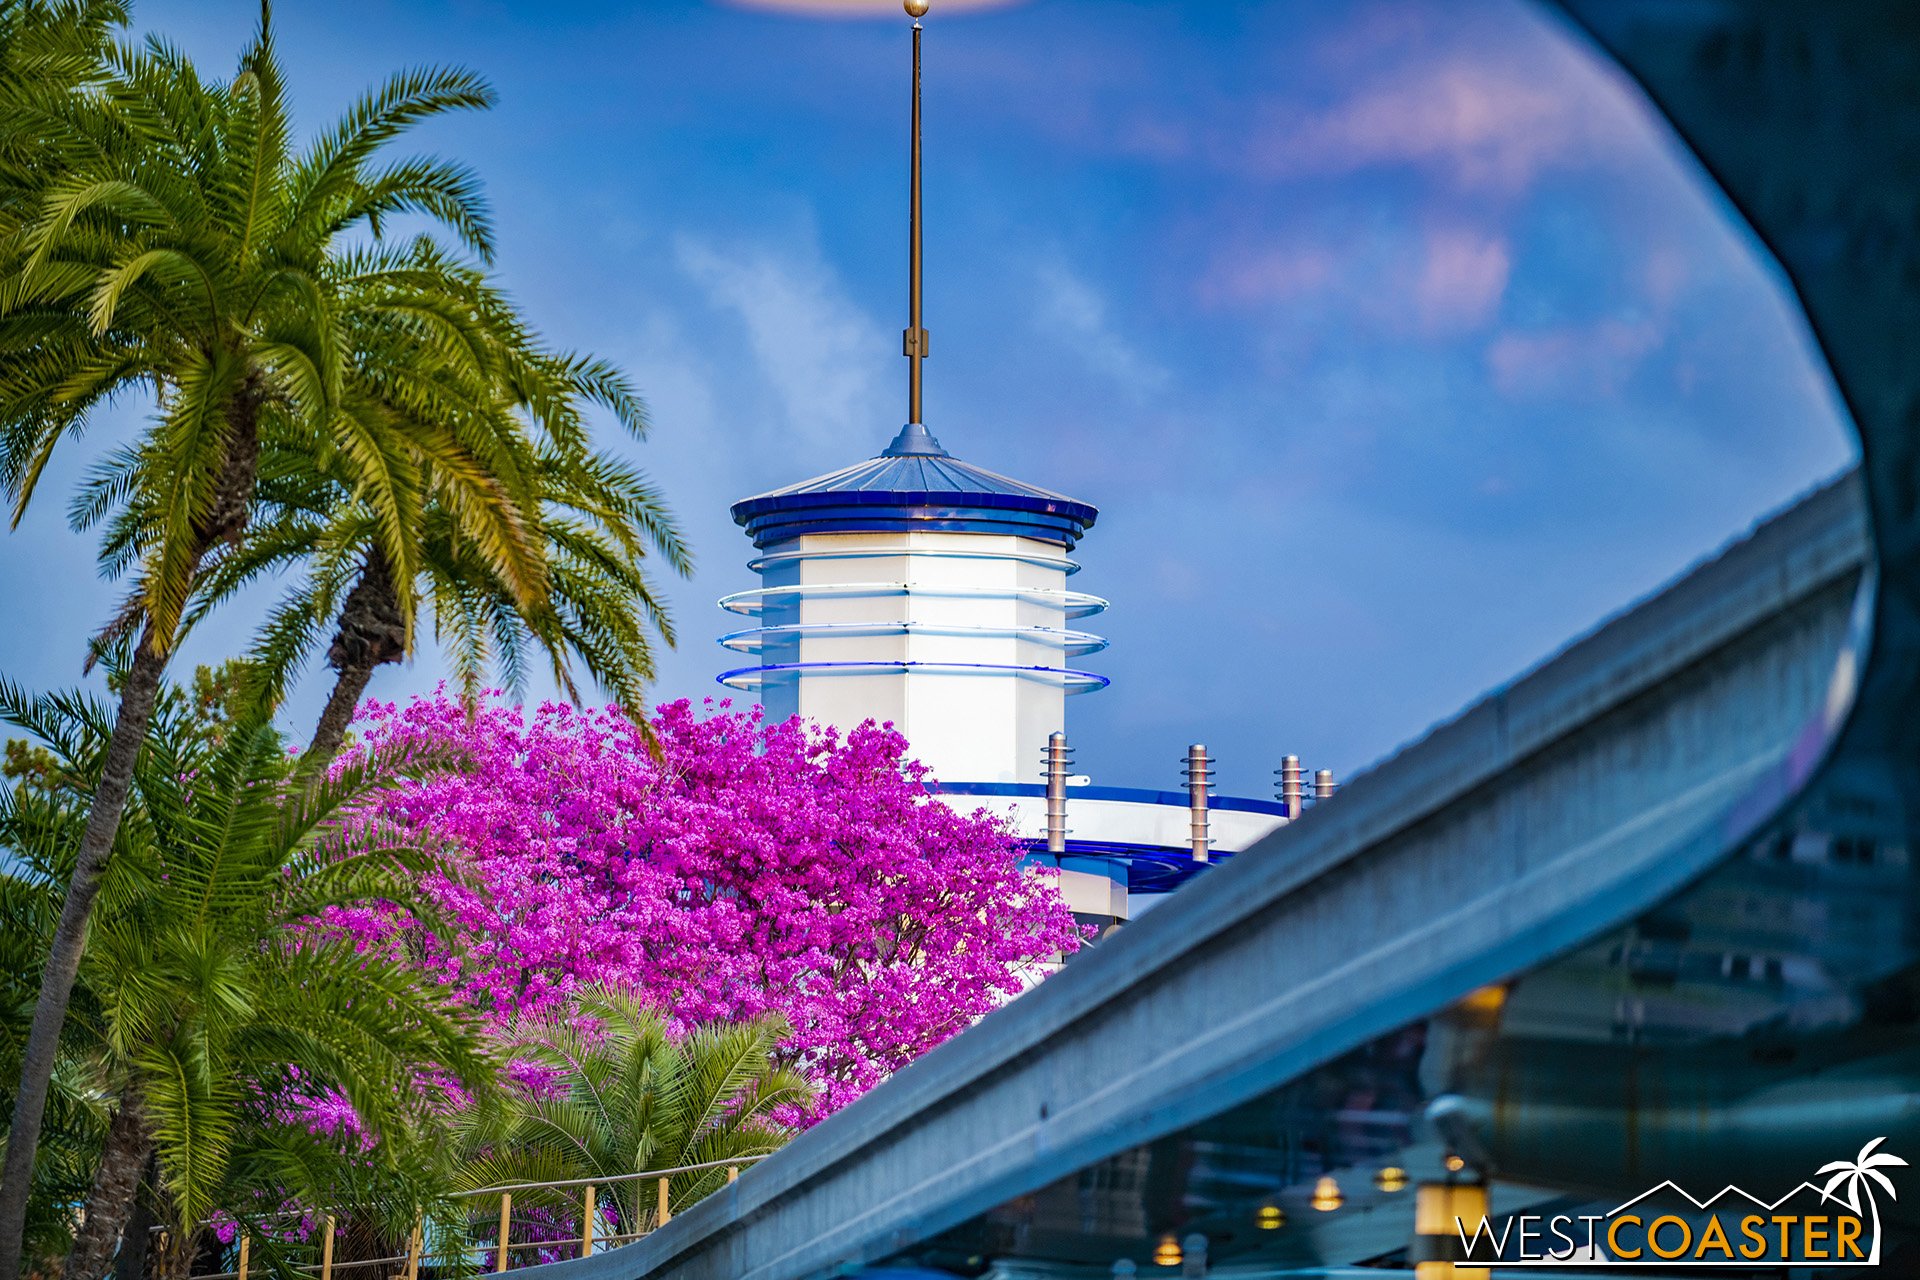  The trumpet tree by the Autopia was also in bloom in early March. 